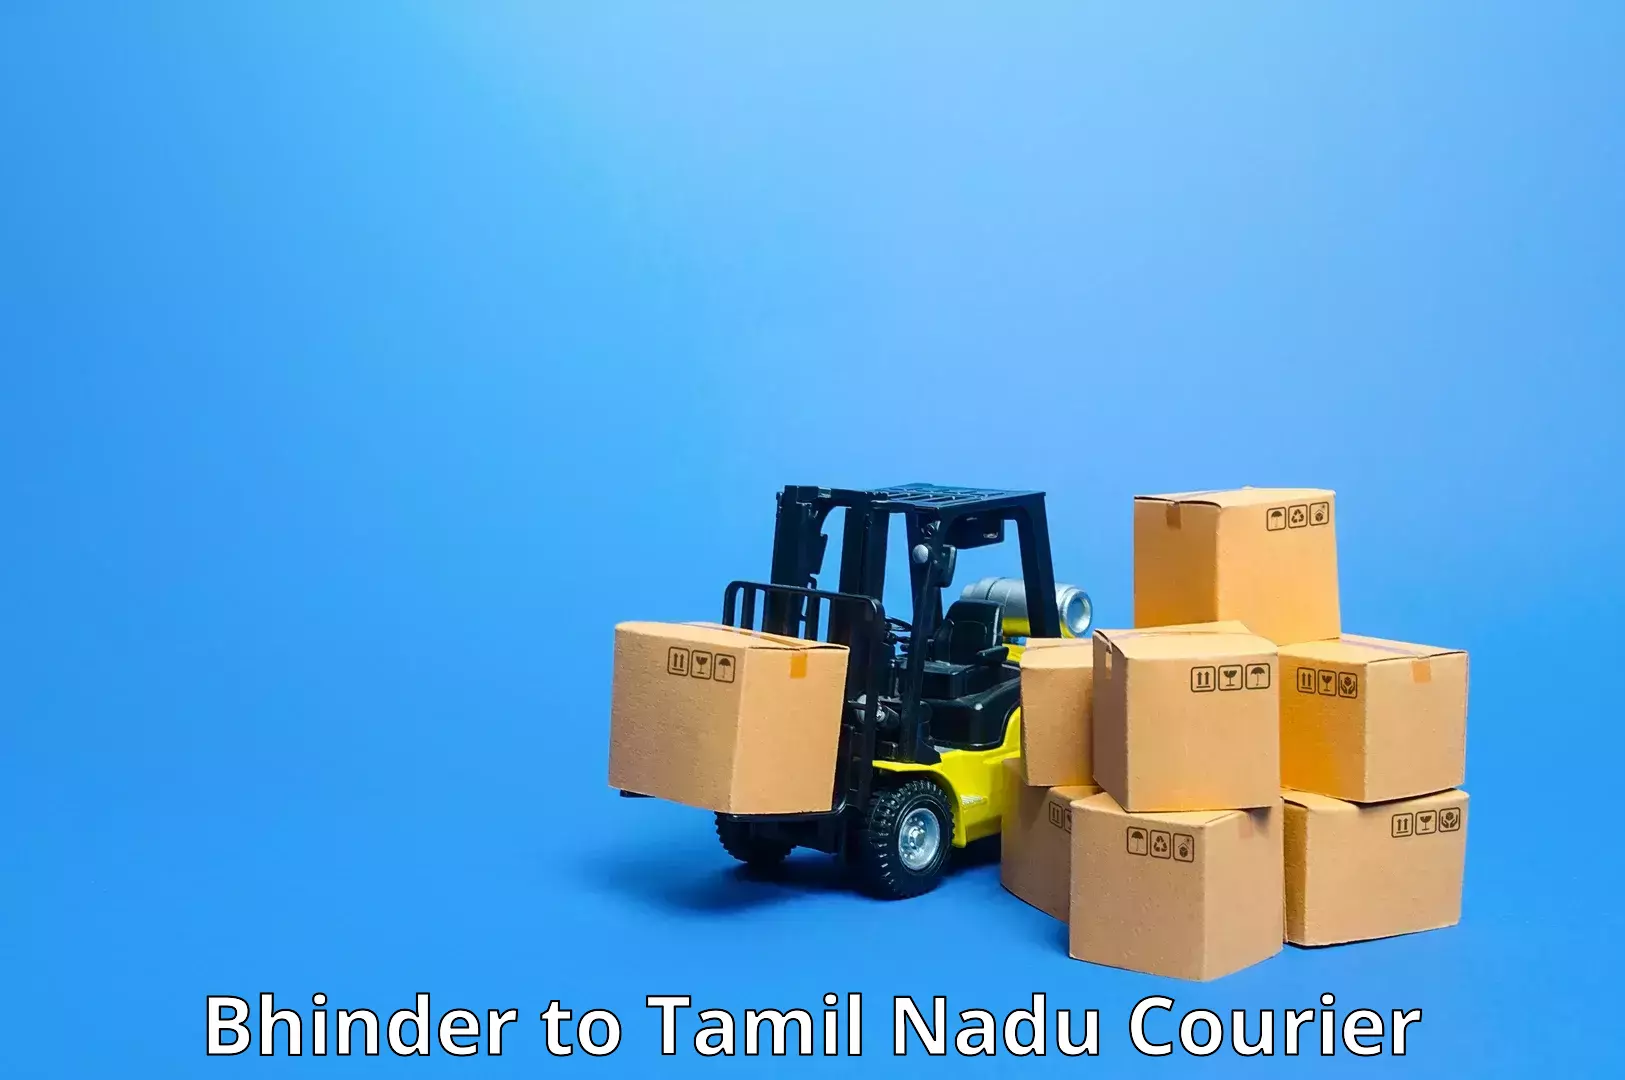 Innovative courier solutions Bhinder to Tamil Nadu